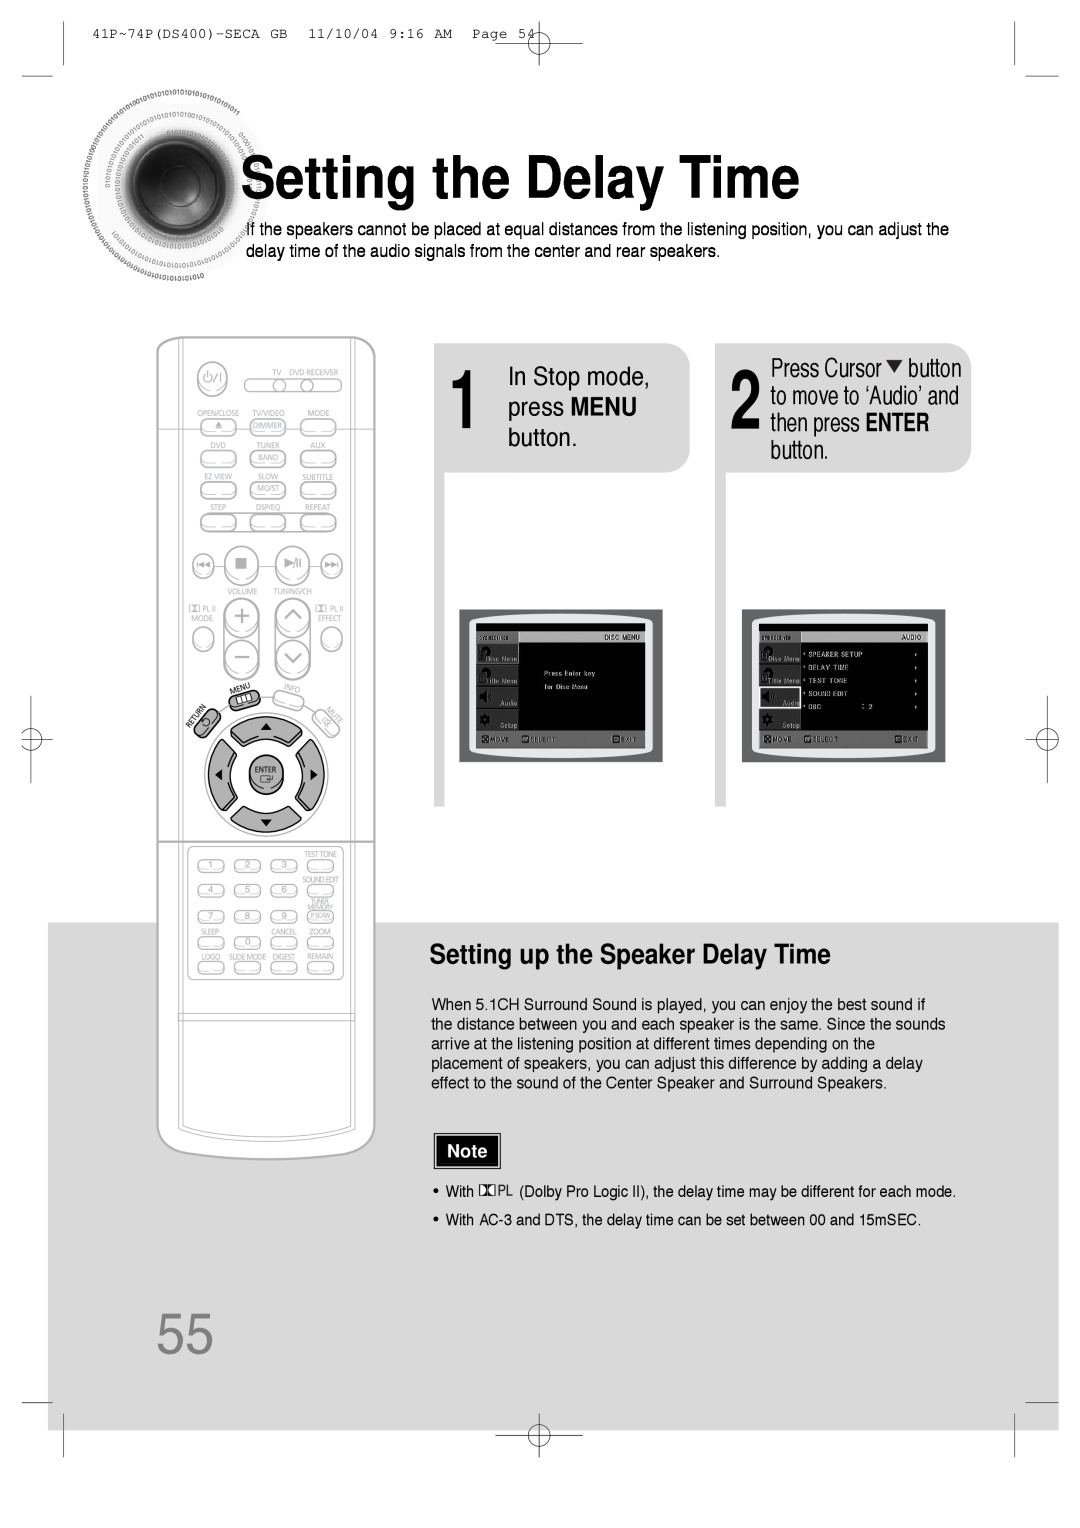 Samsung HT-DS400 Settingthe Delay Time, Setting up the Speaker Delay Time, Press Cursor button, In Stop mode 